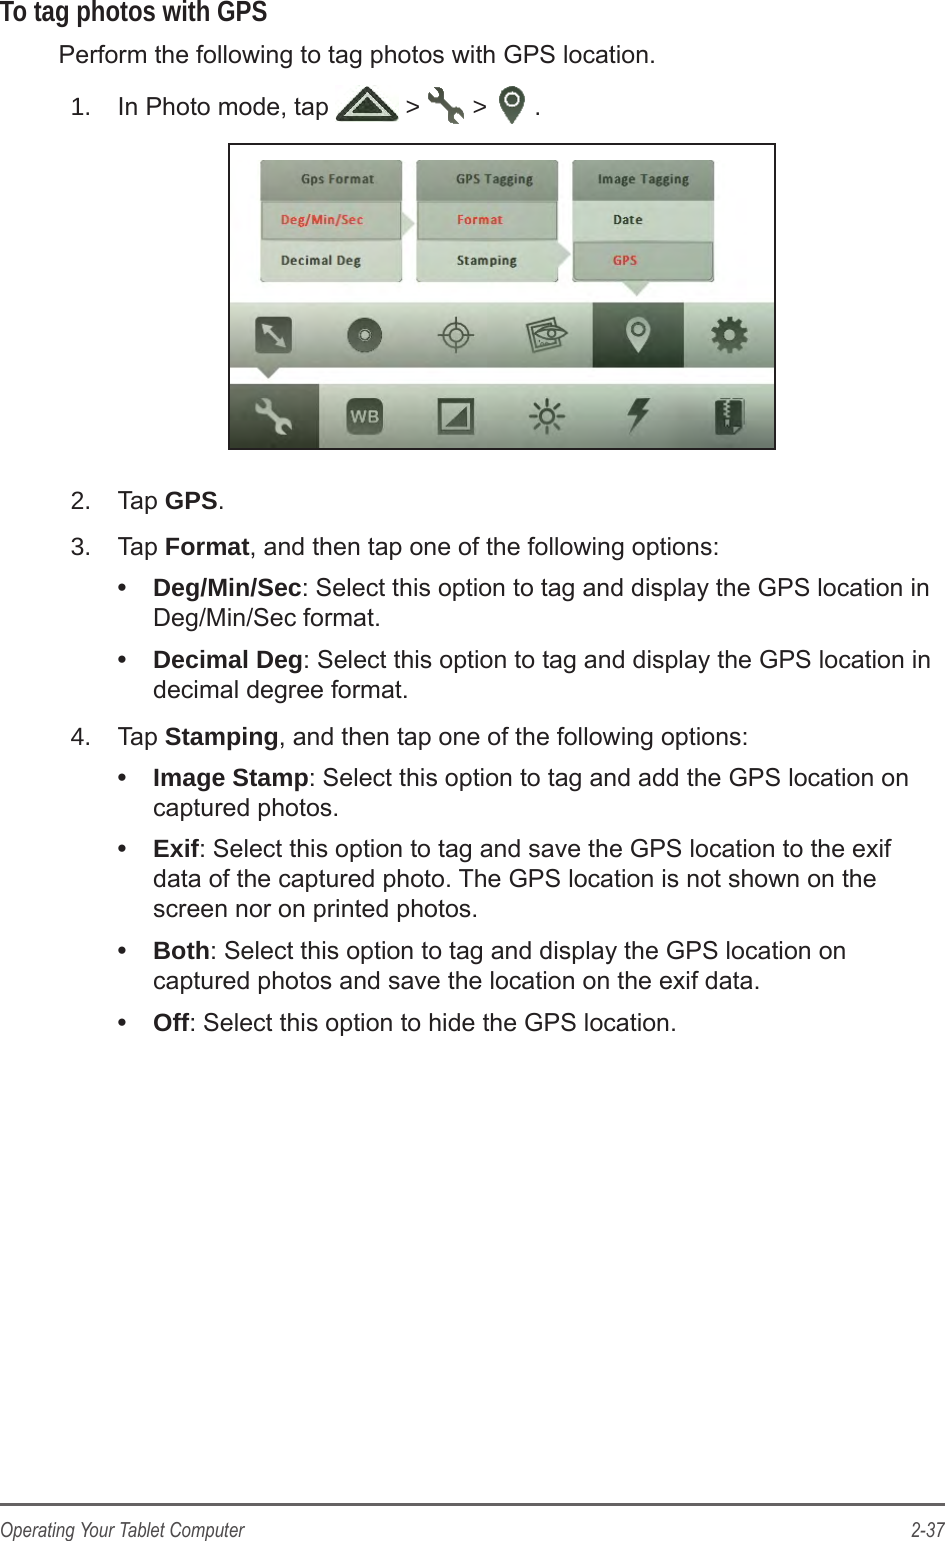 2-37Operating Your Tablet ComputerTo tag photos with GPSPerform the following to tag photos with GPS location.1.  In Photo mode, tap   &gt;   &gt;  .2.  Tap GPS.3.  Tap Format, and then tap one of the following options: •  Deg/Min/Sec: Select this option to tag and display the GPS location in Deg/Min/Sec format.•  Decimal Deg: Select this option to tag and display the GPS location in decimal degree format.4.  Tap Stamping, and then tap one of the following options: •  Image Stamp: Select this option to tag and add the GPS location on captured photos.•  Exif: Select this option to tag and save the GPS location to the exif data of the captured photo. The GPS location is not shown on the screen nor on printed photos.•  Both: Select this option to tag and display the GPS location on captured photos and save the location on the exif data.•  Off: Select this option to hide the GPS location.